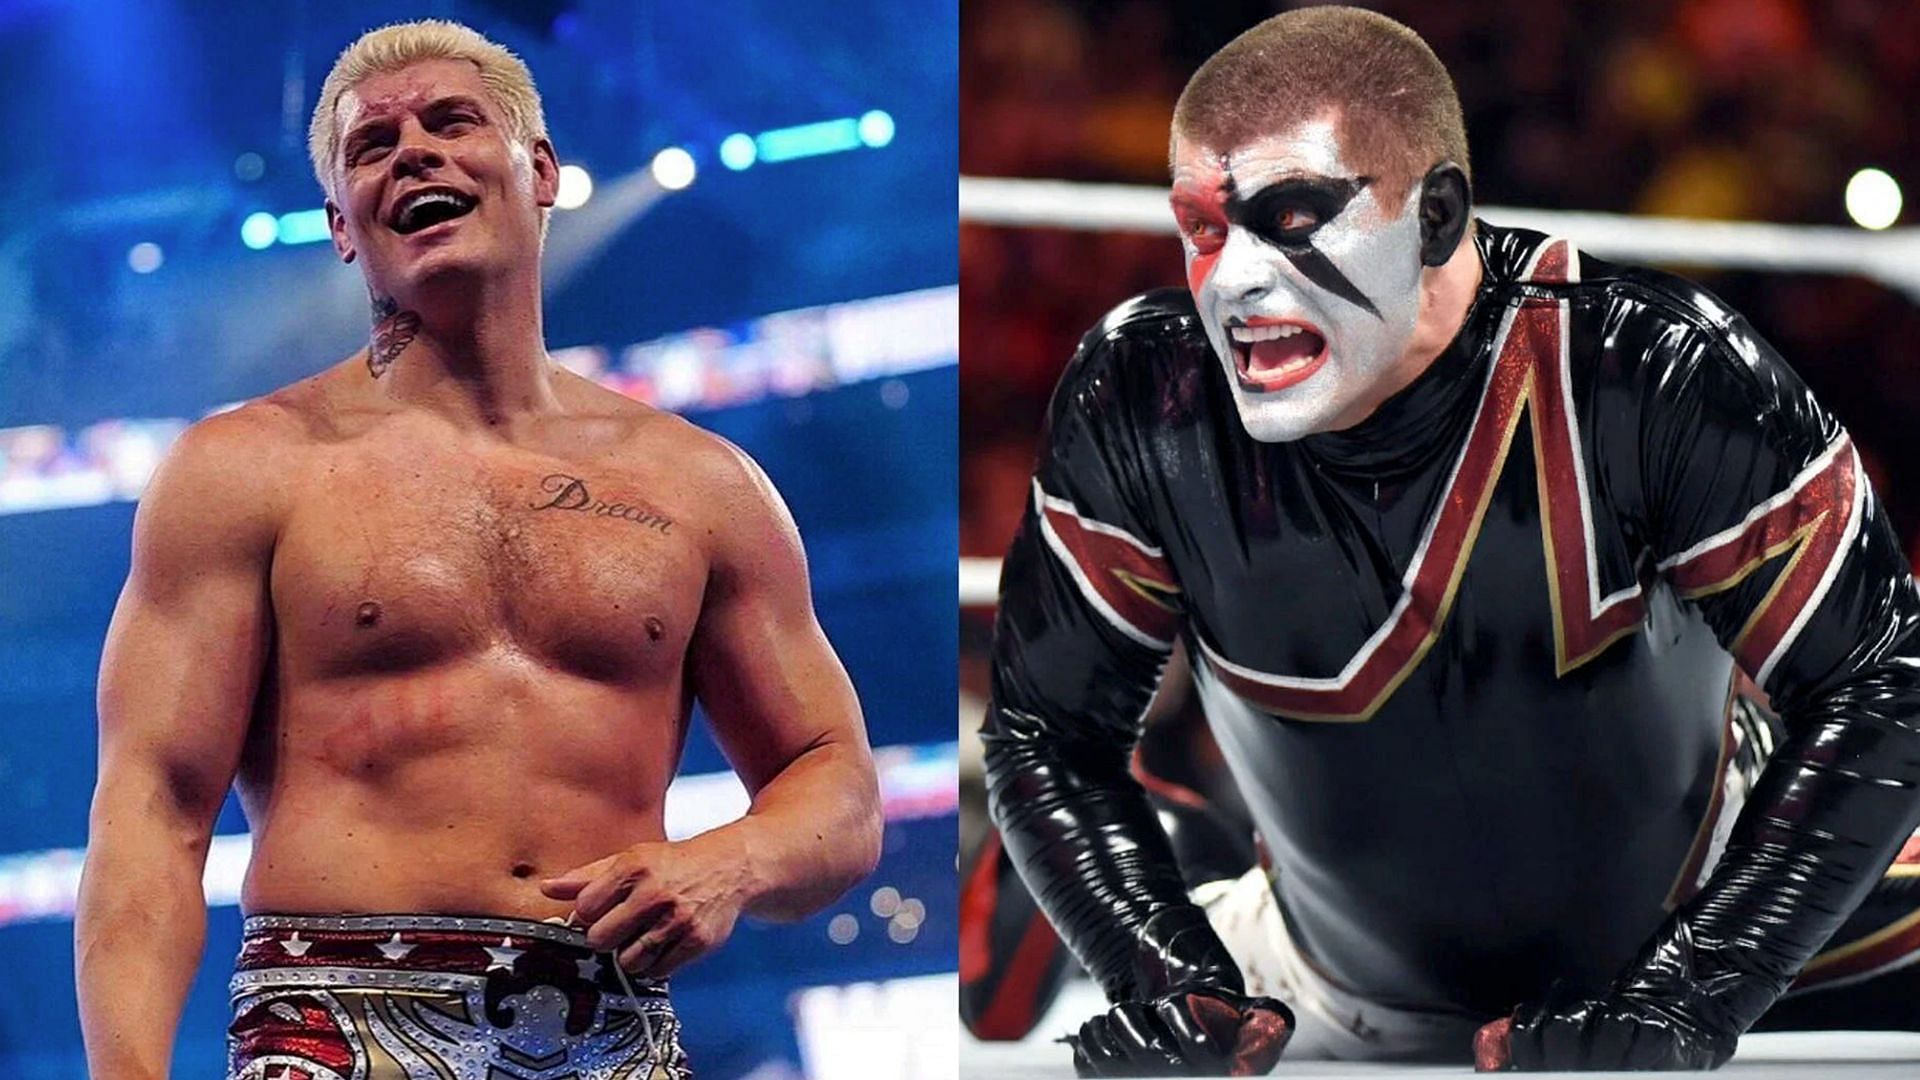 Cody Rhodes was once known as Stardust in WWE.